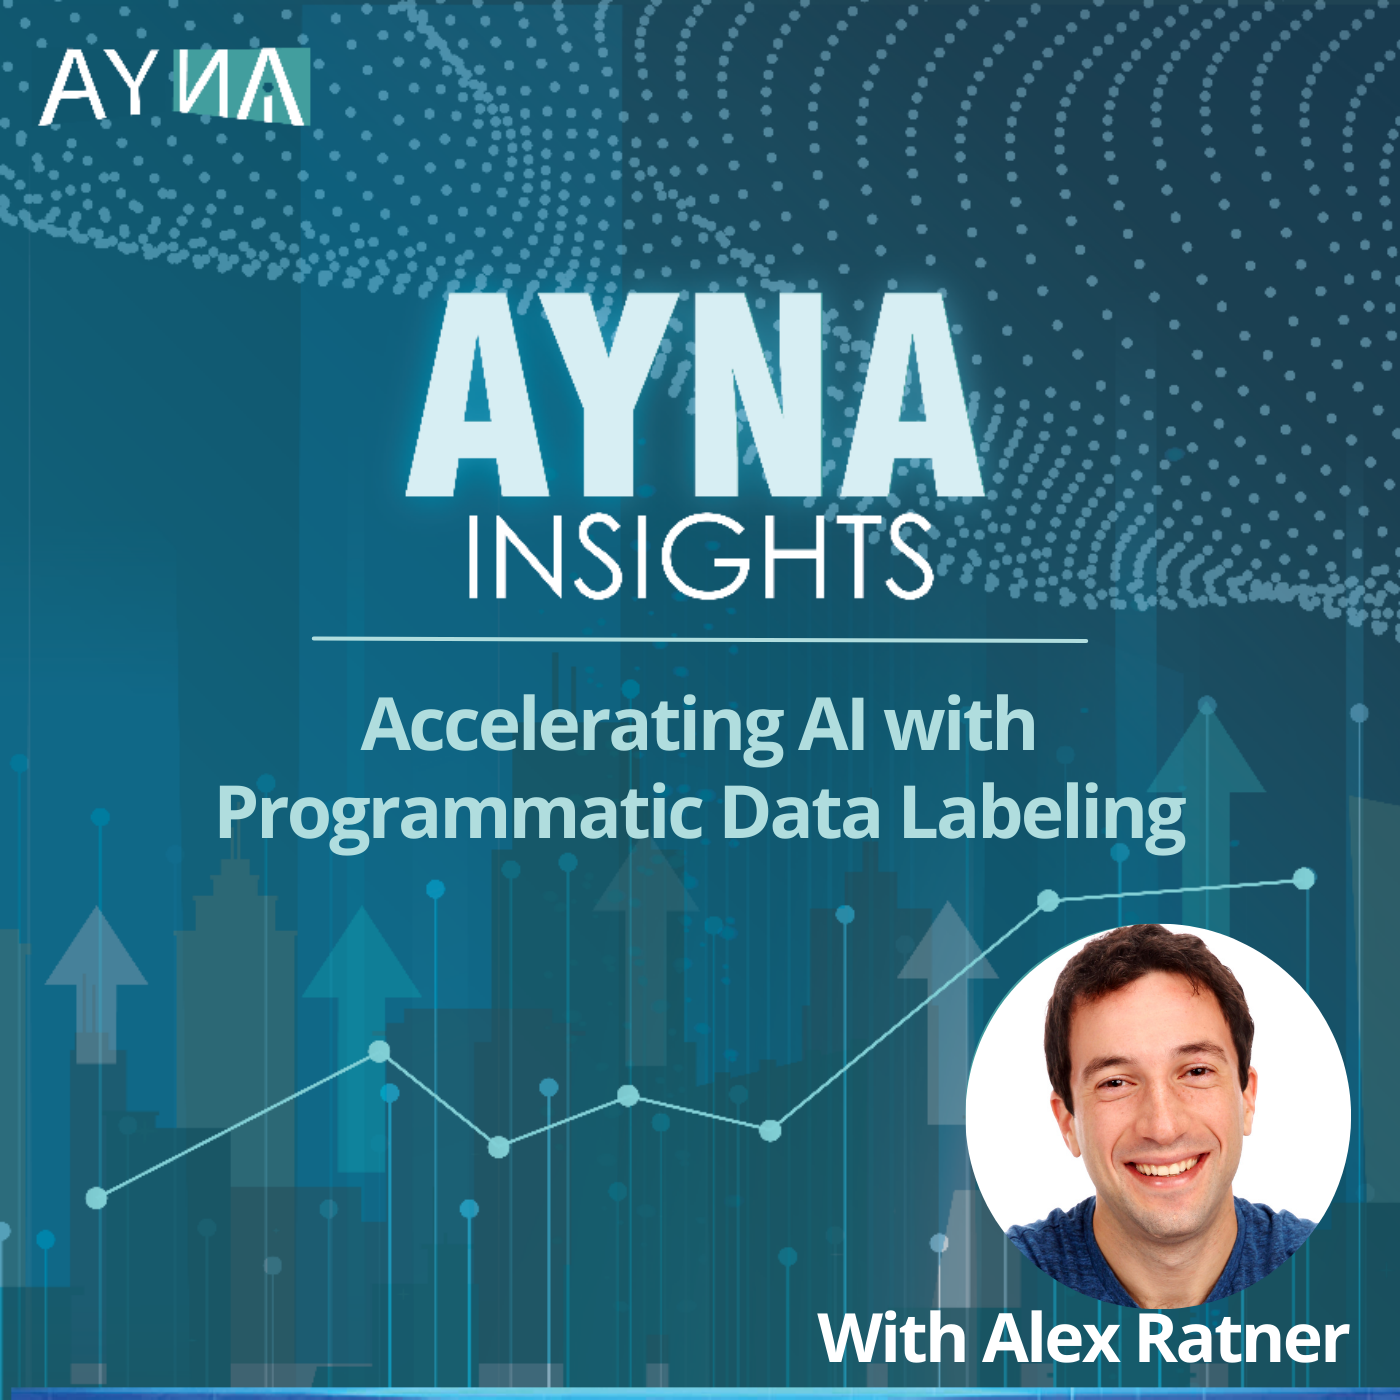 Alex Ratner: Accelerating AI with Programmatic Data Labeling